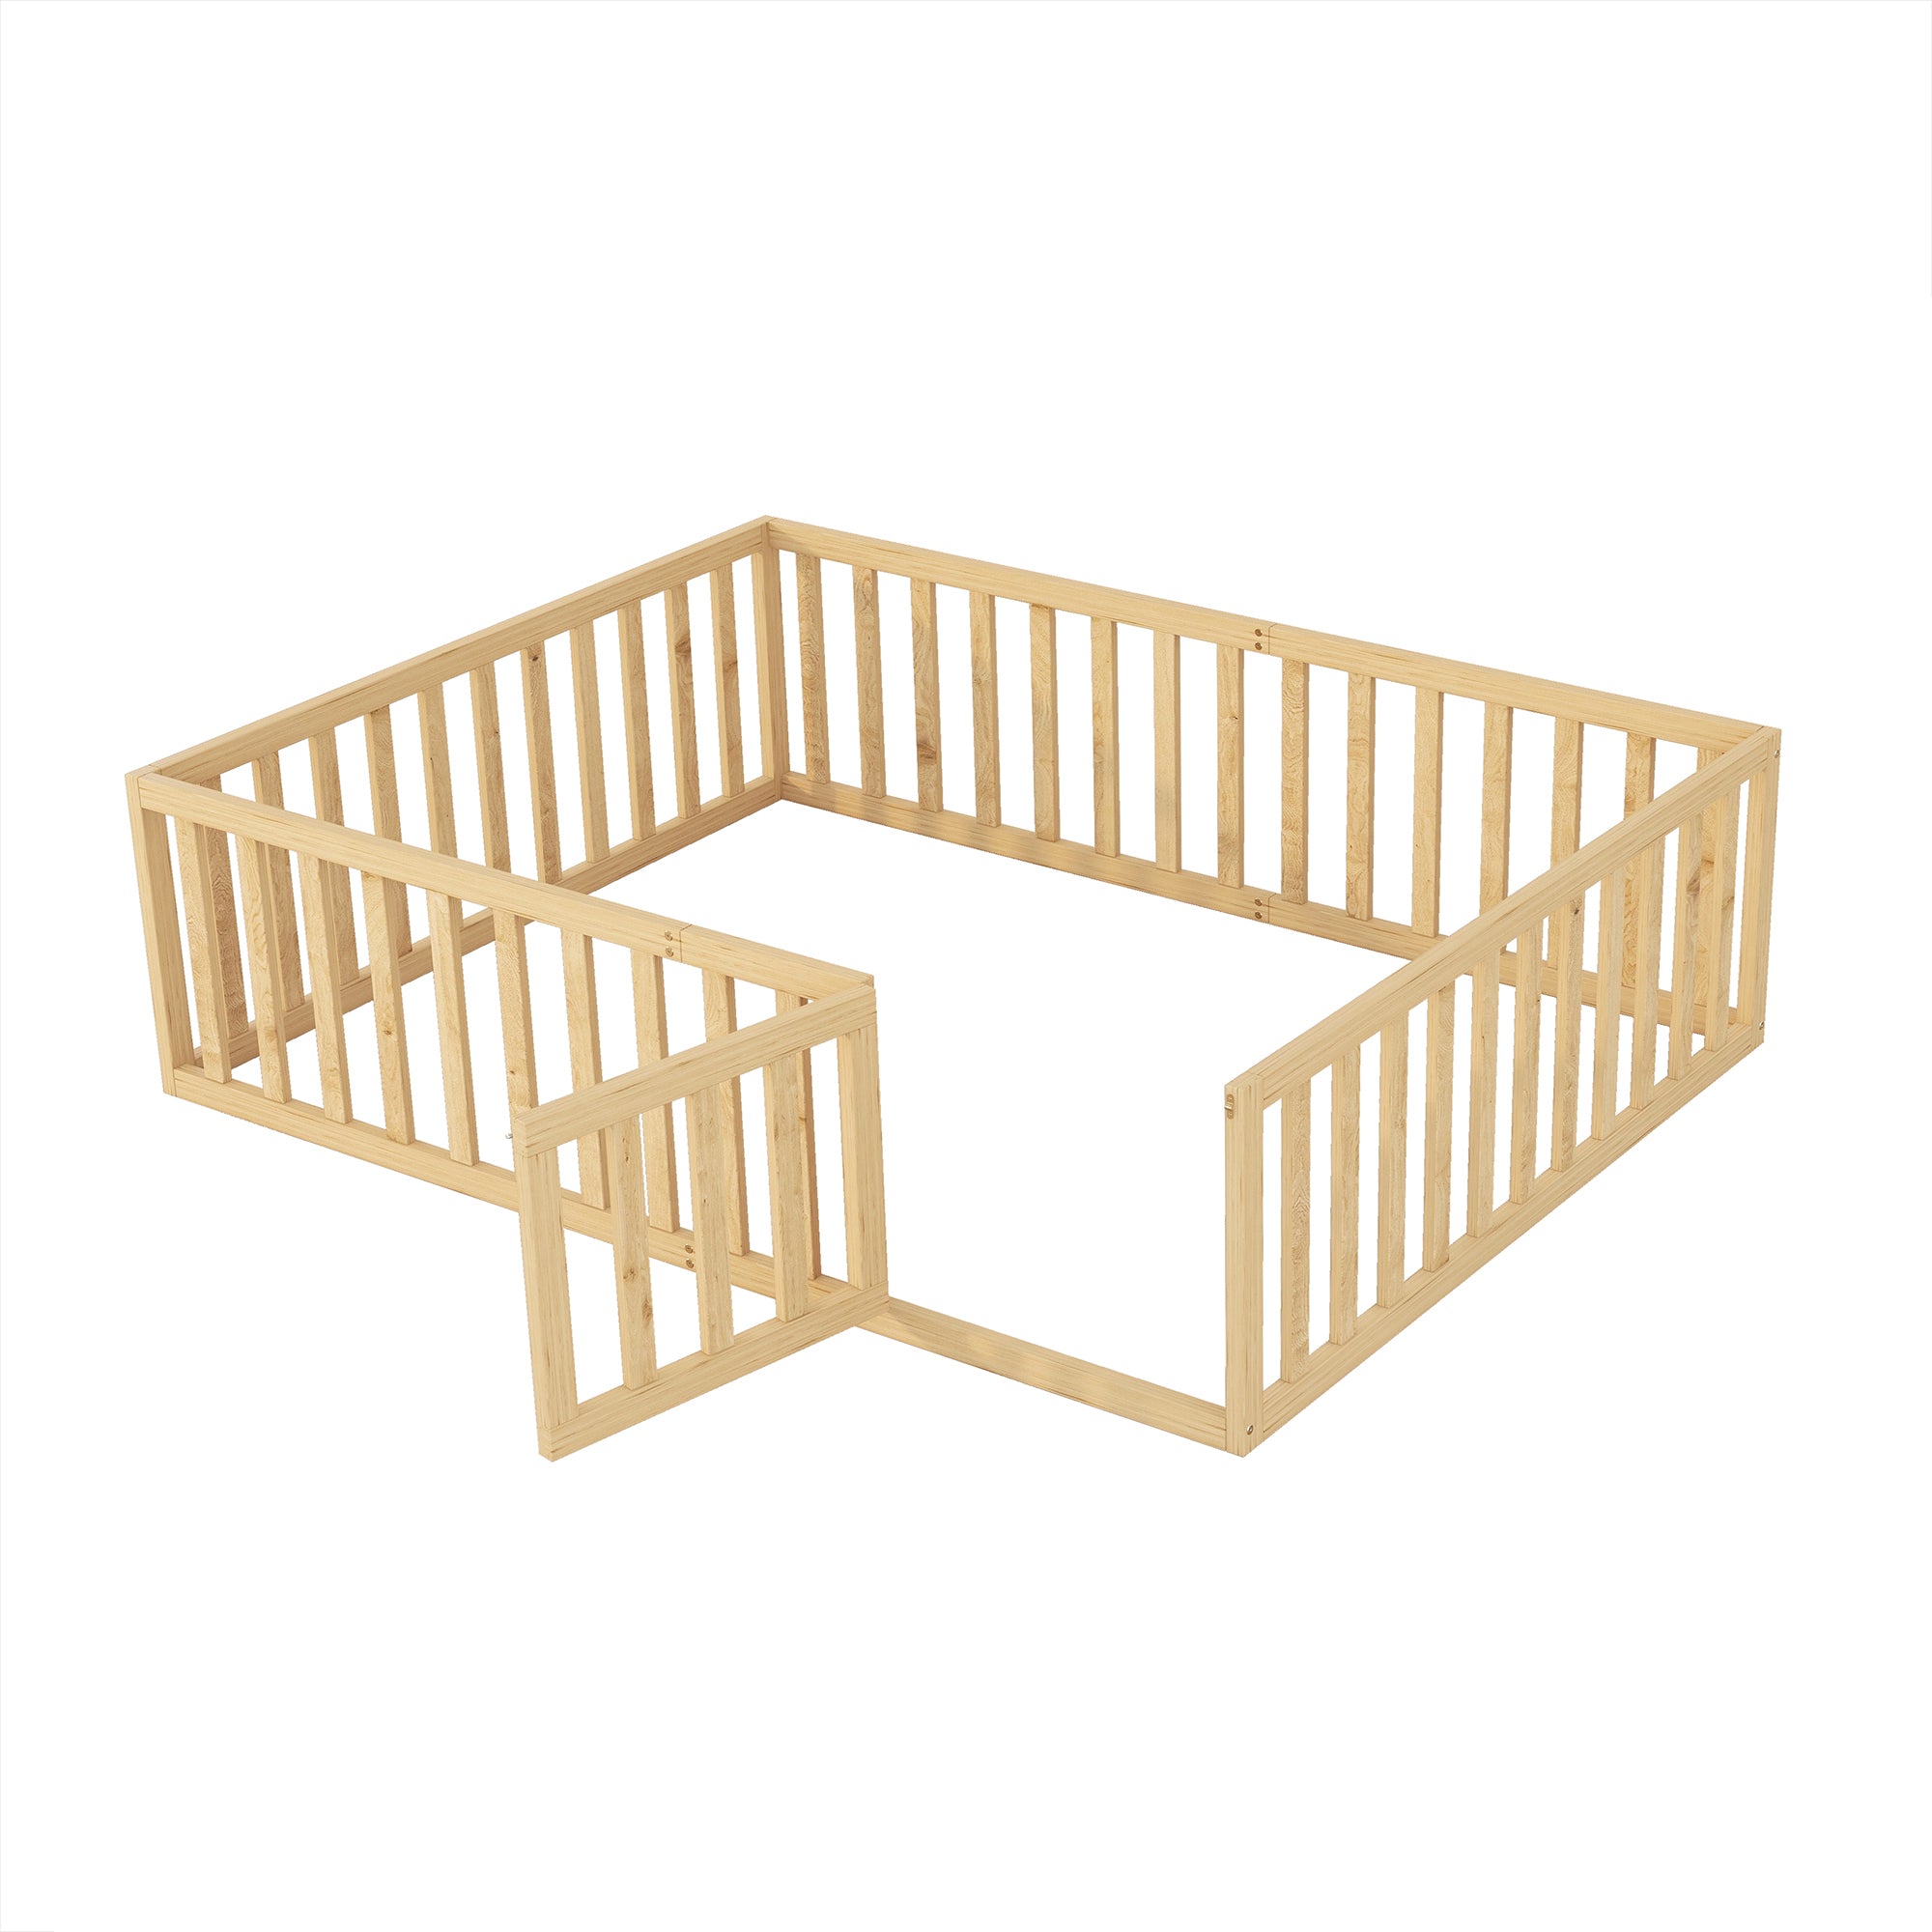 Queen Size Wood Floor Bed Frame with Fence and Door (Natural)